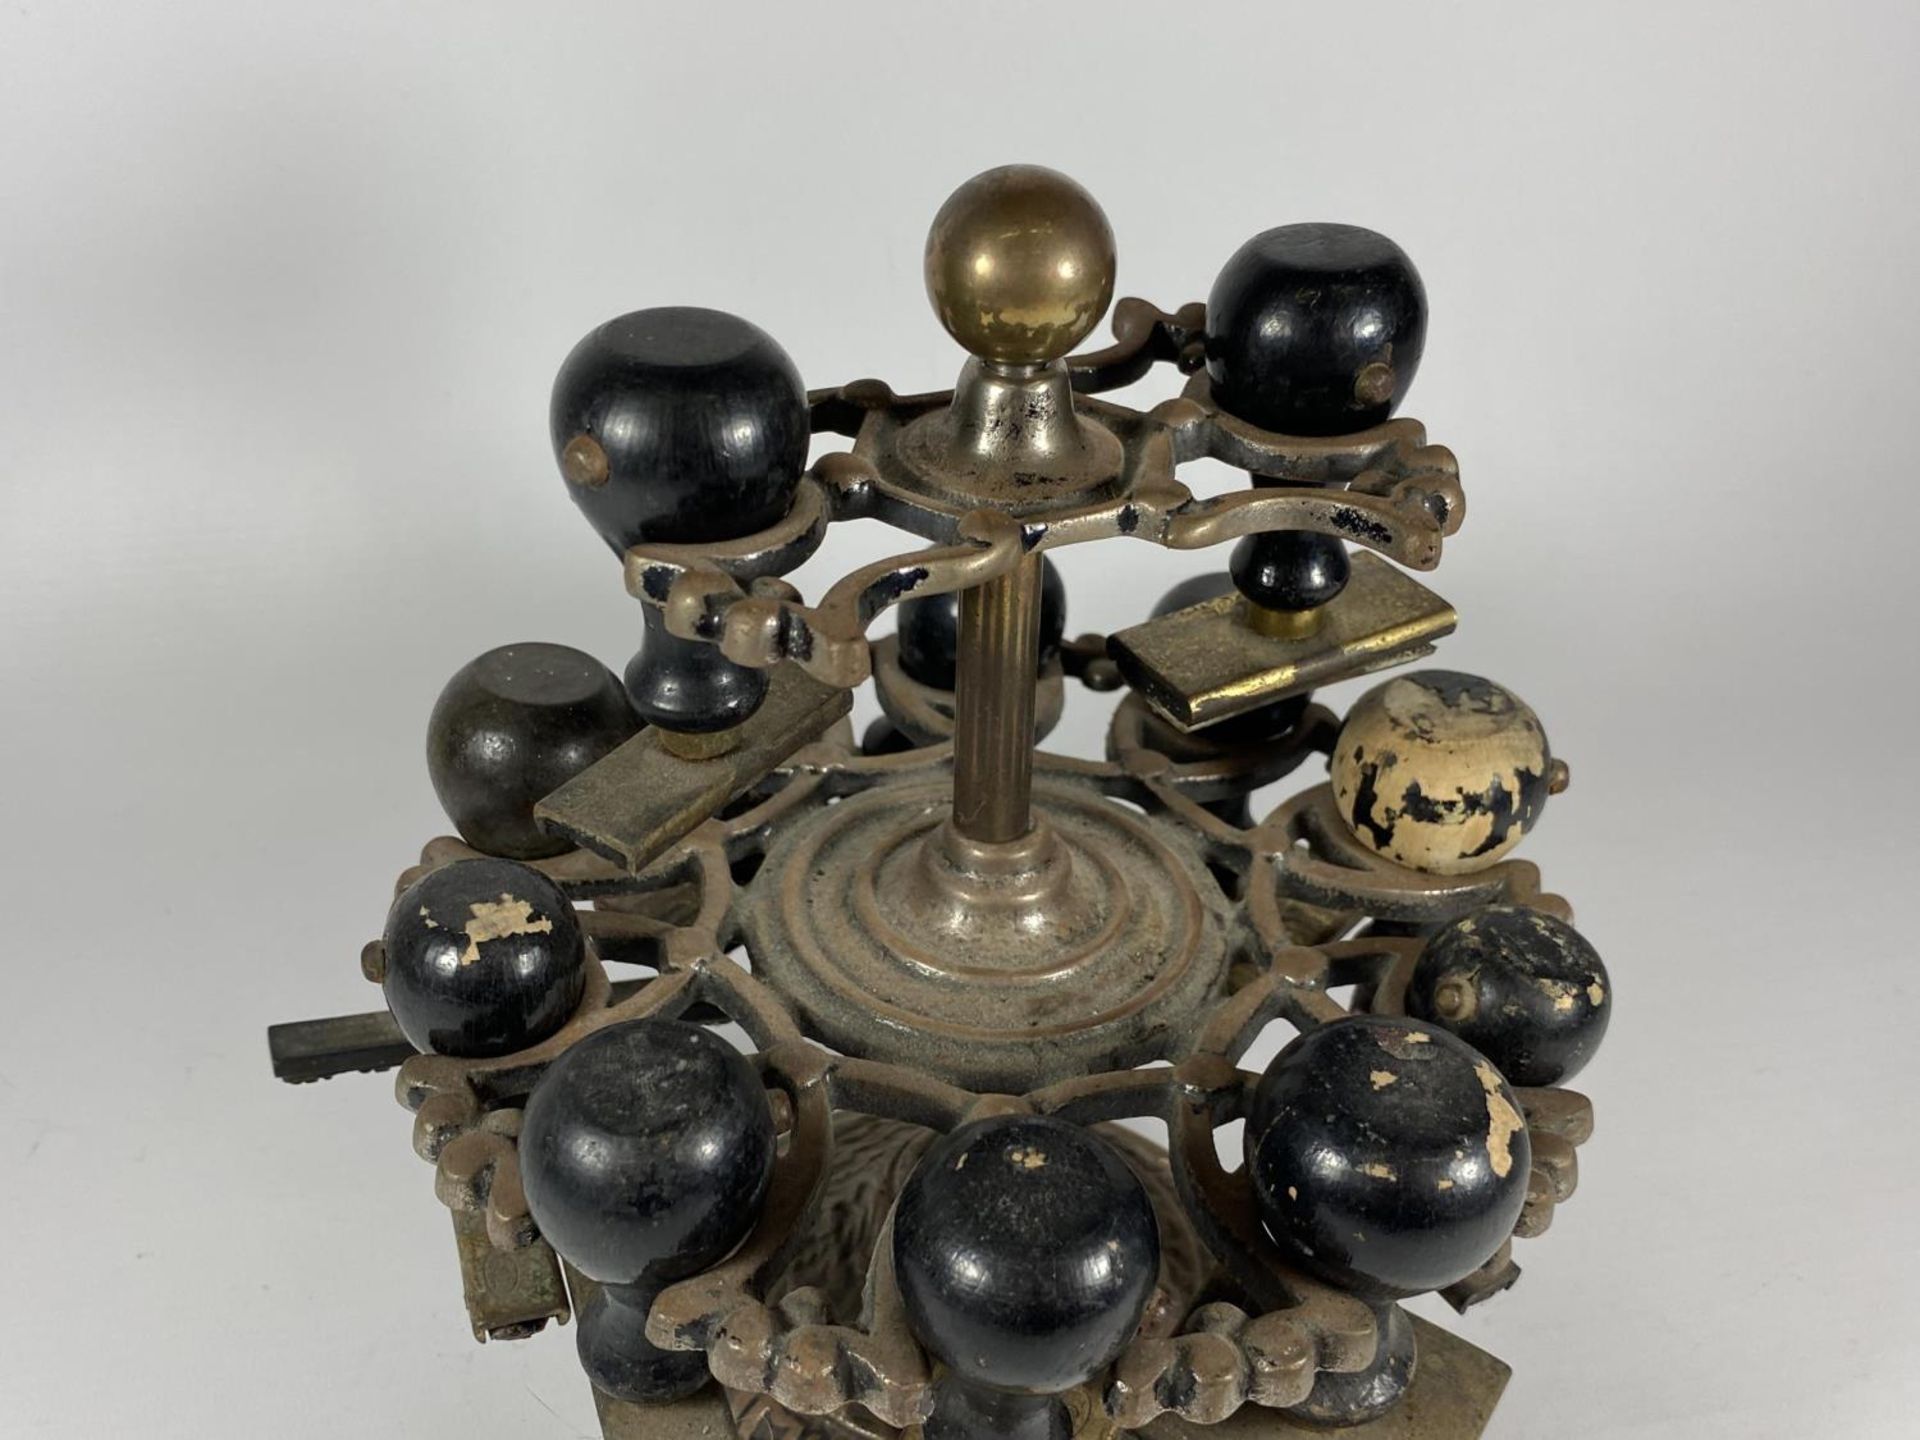 AN UNUSUAL 19TH CENTURY BRASS TWO TIER REVOLVING STAMP HOLDER WITH ORIGINAL EBONY HANDLED STAMPS, - Image 3 of 4